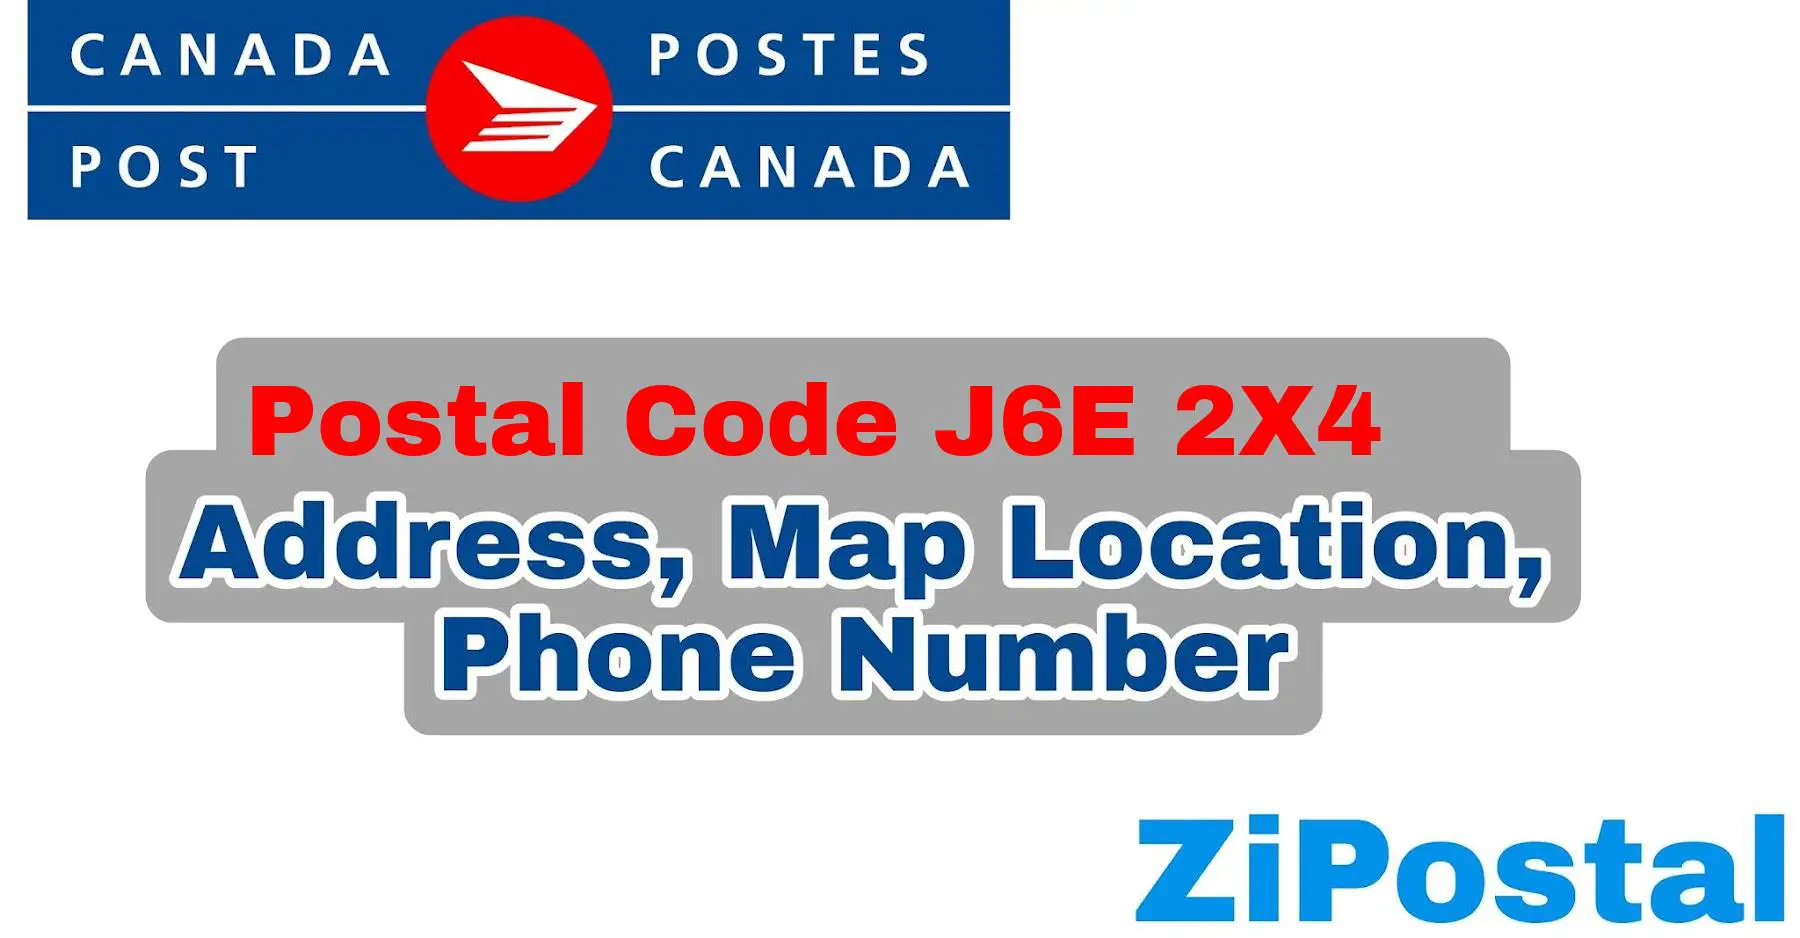 Postal Code J6E 2X4 Address Map Location and Phone Number